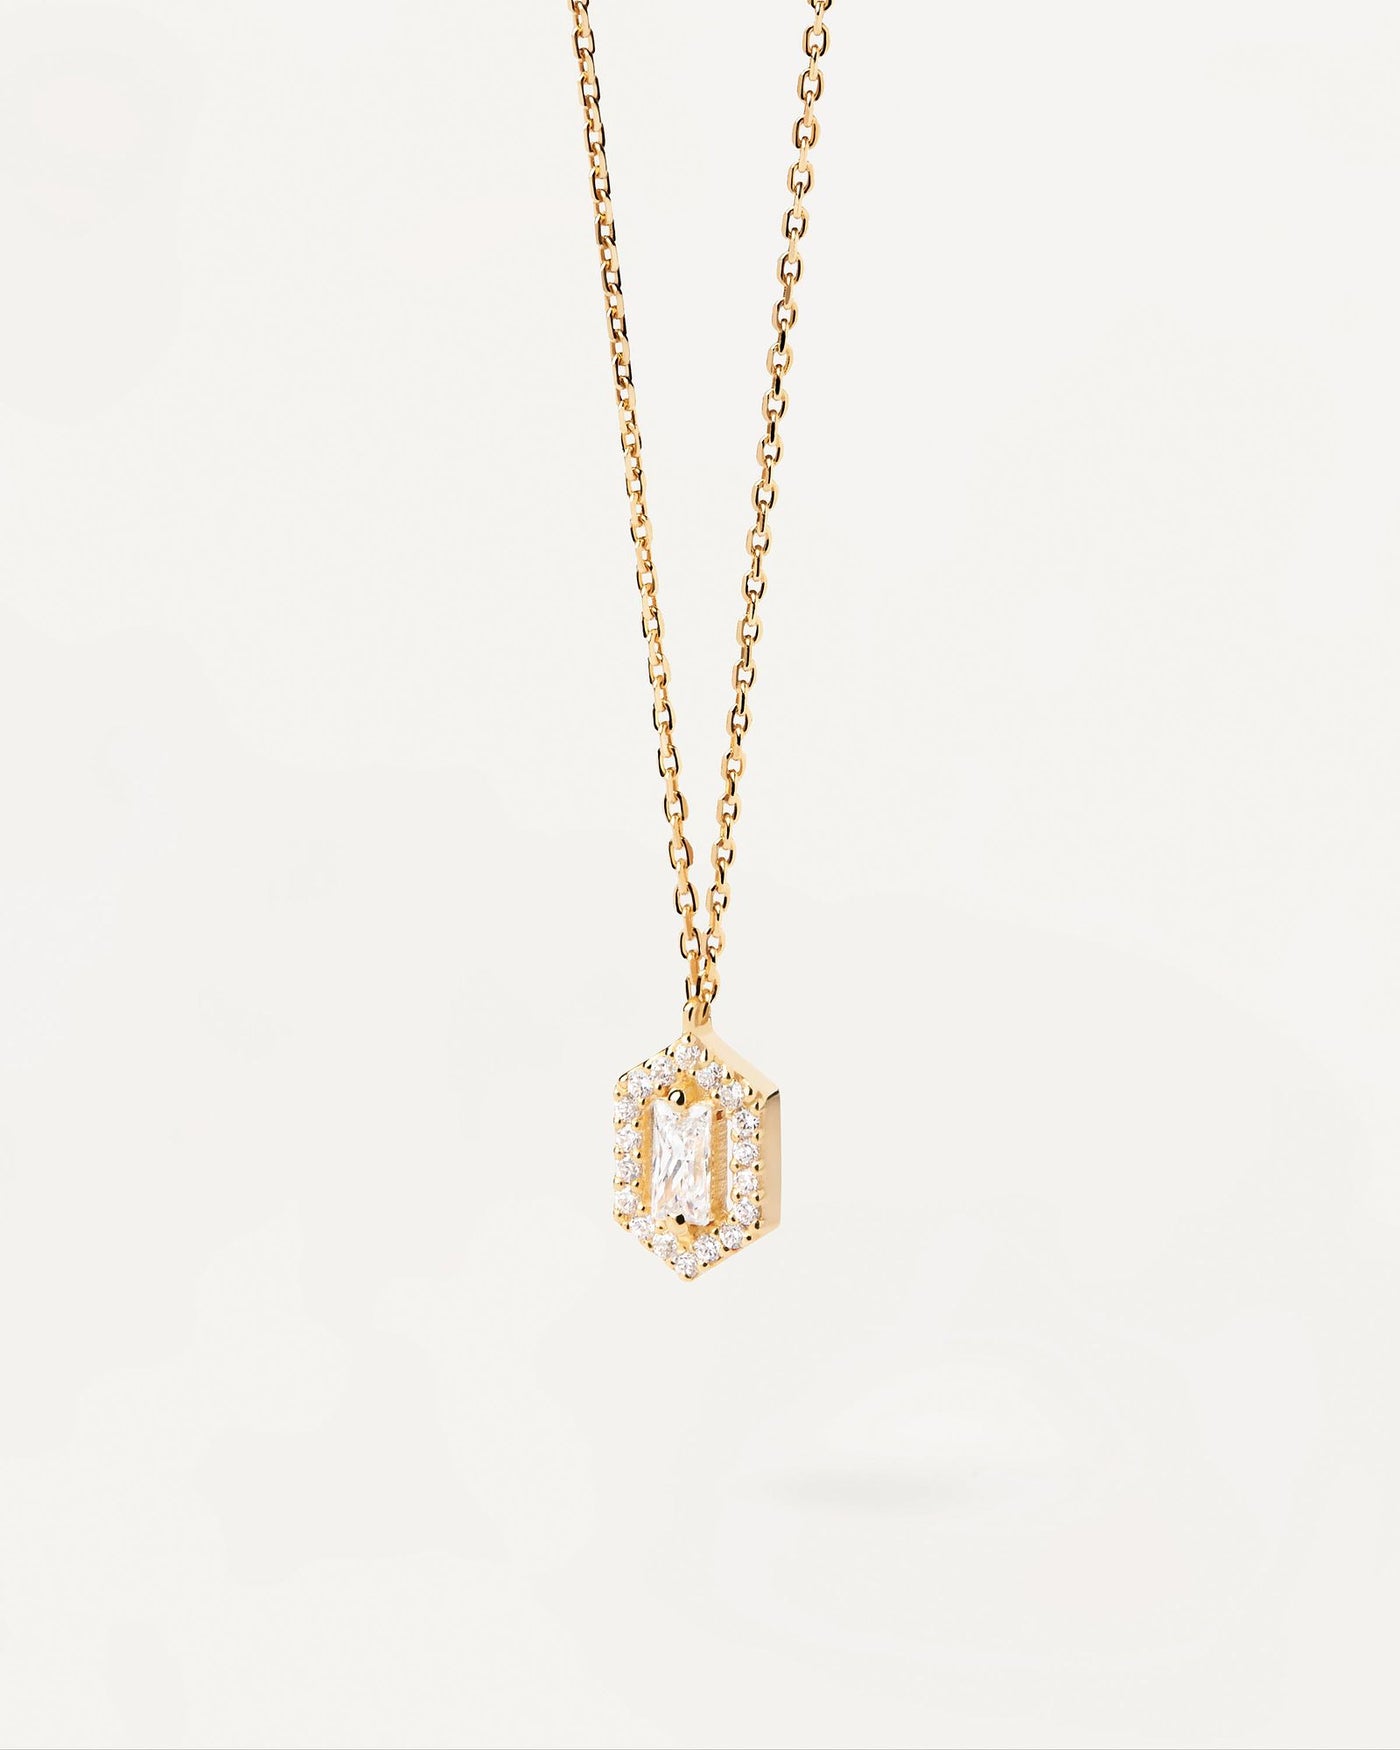 2024 Selection | Sentiment Necklace. Gold-plated necklace with hexagon shape pendant with white zirconia. Get the latest arrival from PDPAOLA. Place your order safely and get this Best Seller. Free Shipping.